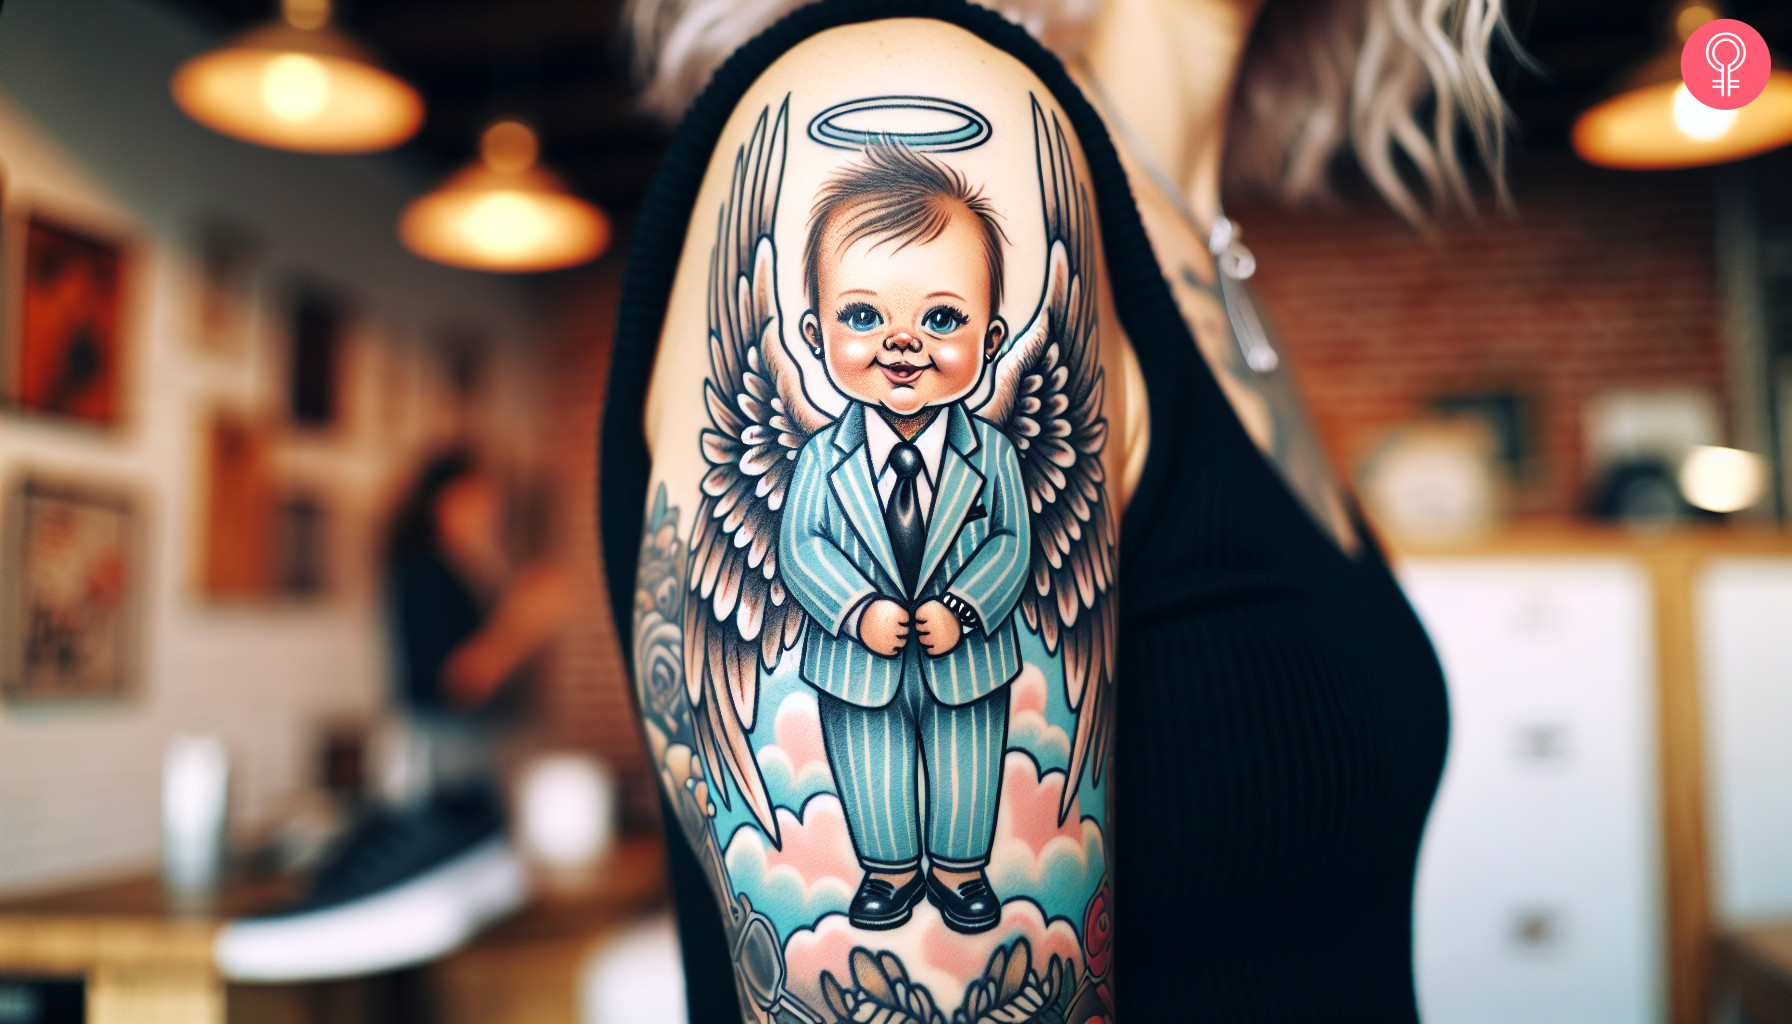 A boss baby angel tattoo on the upper arm of a woman